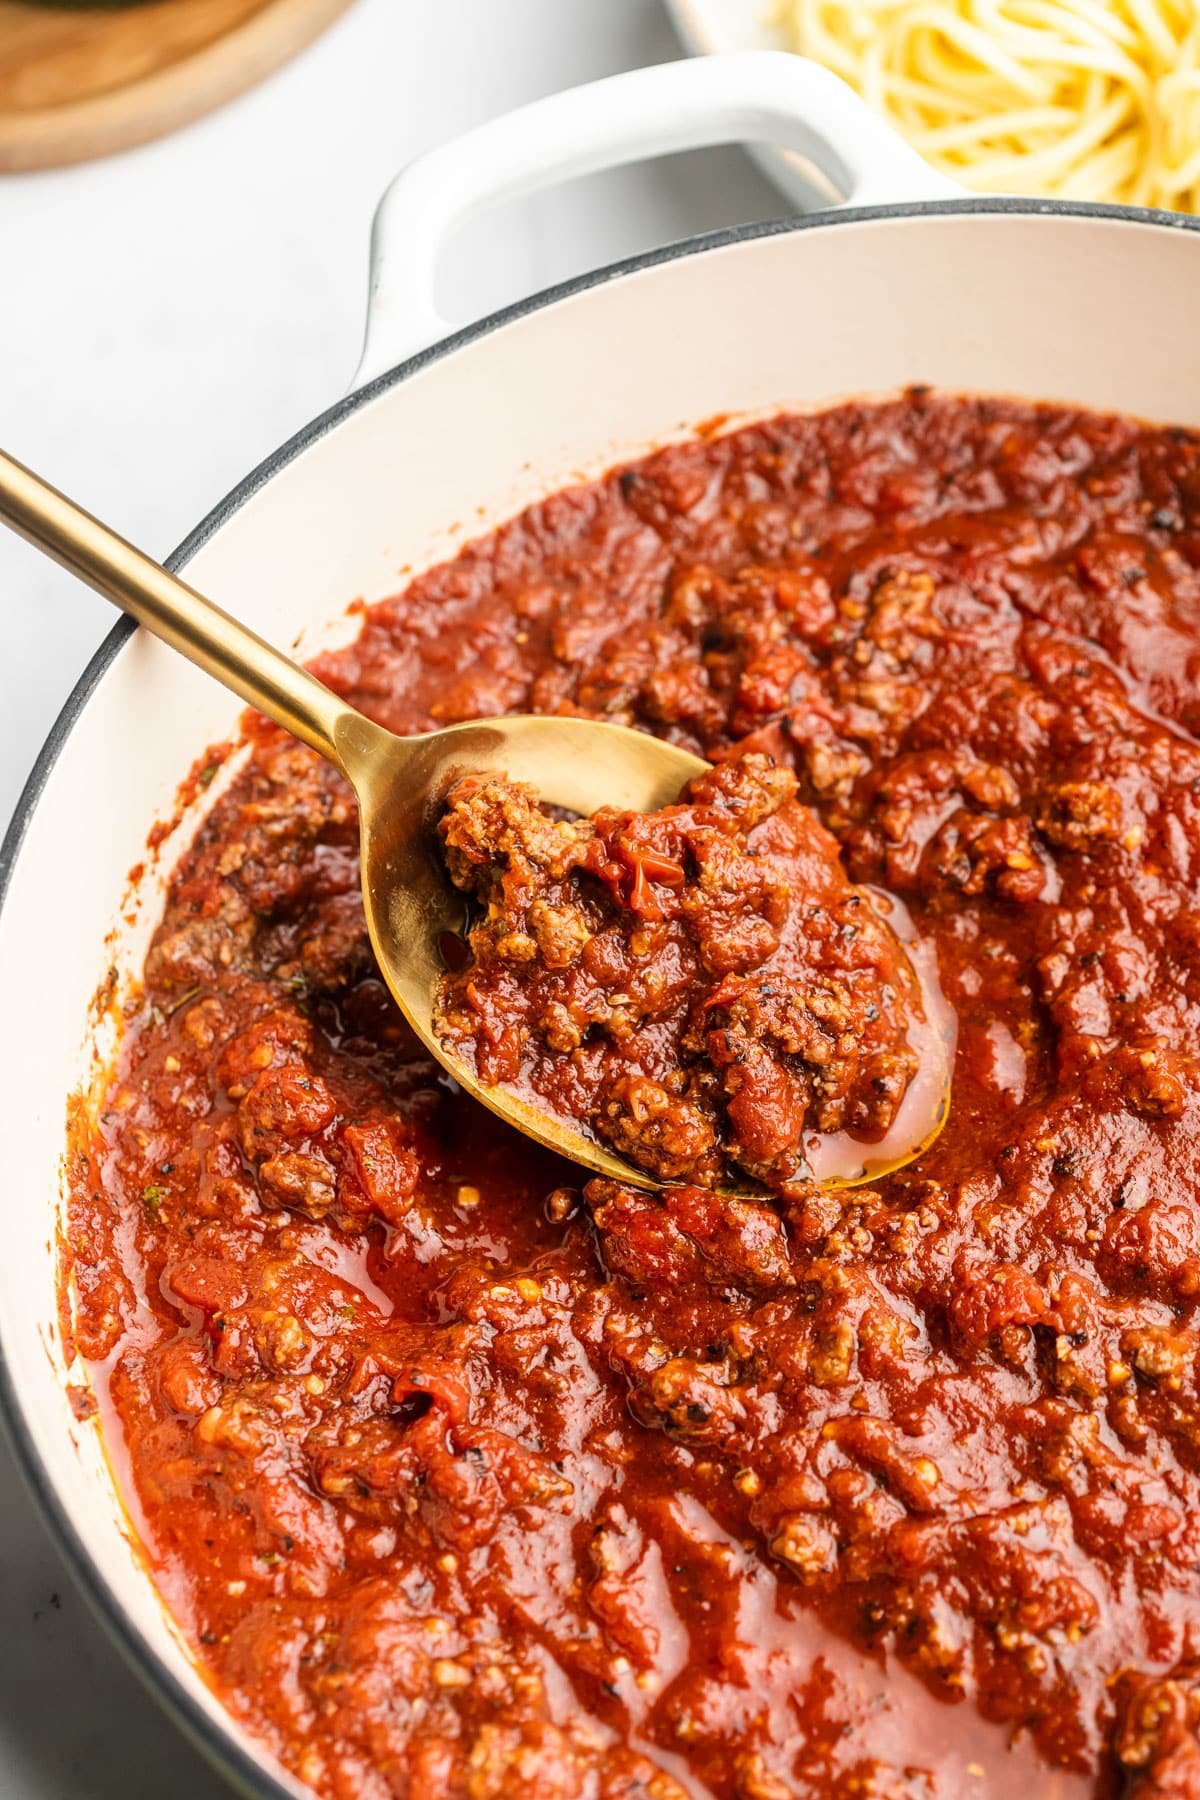 https://thewholecook.com/wp-content/uploads/2023/08/Easiest-Homemade-Spaghetti-Sauce-1-5.jpg